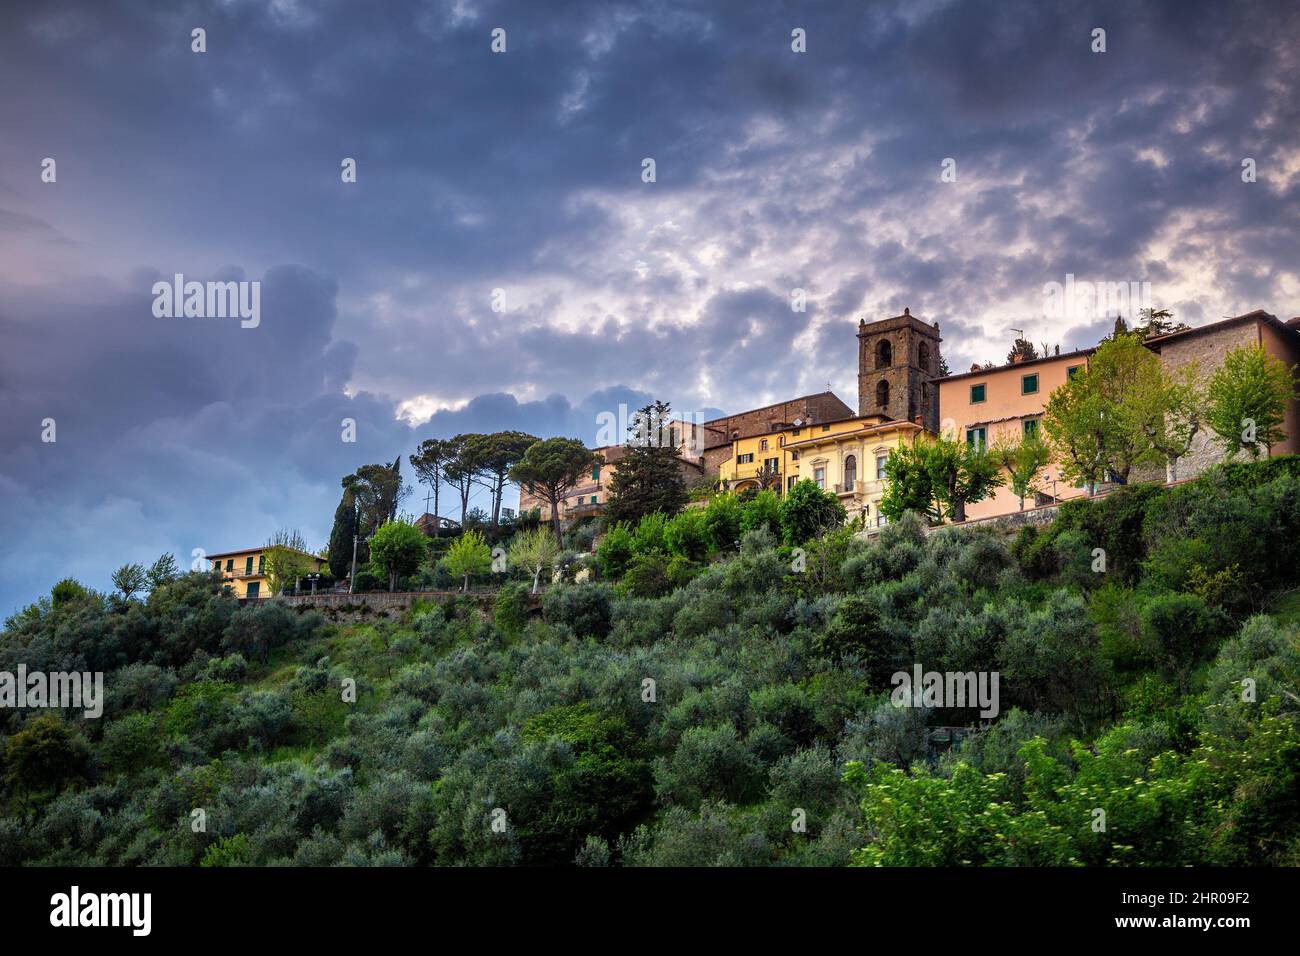 Montecatini Alto - medieval village above Montecatini Terme town with surrounding landscape at sunset in Tuscany, Italy, Europe. Stock Photo